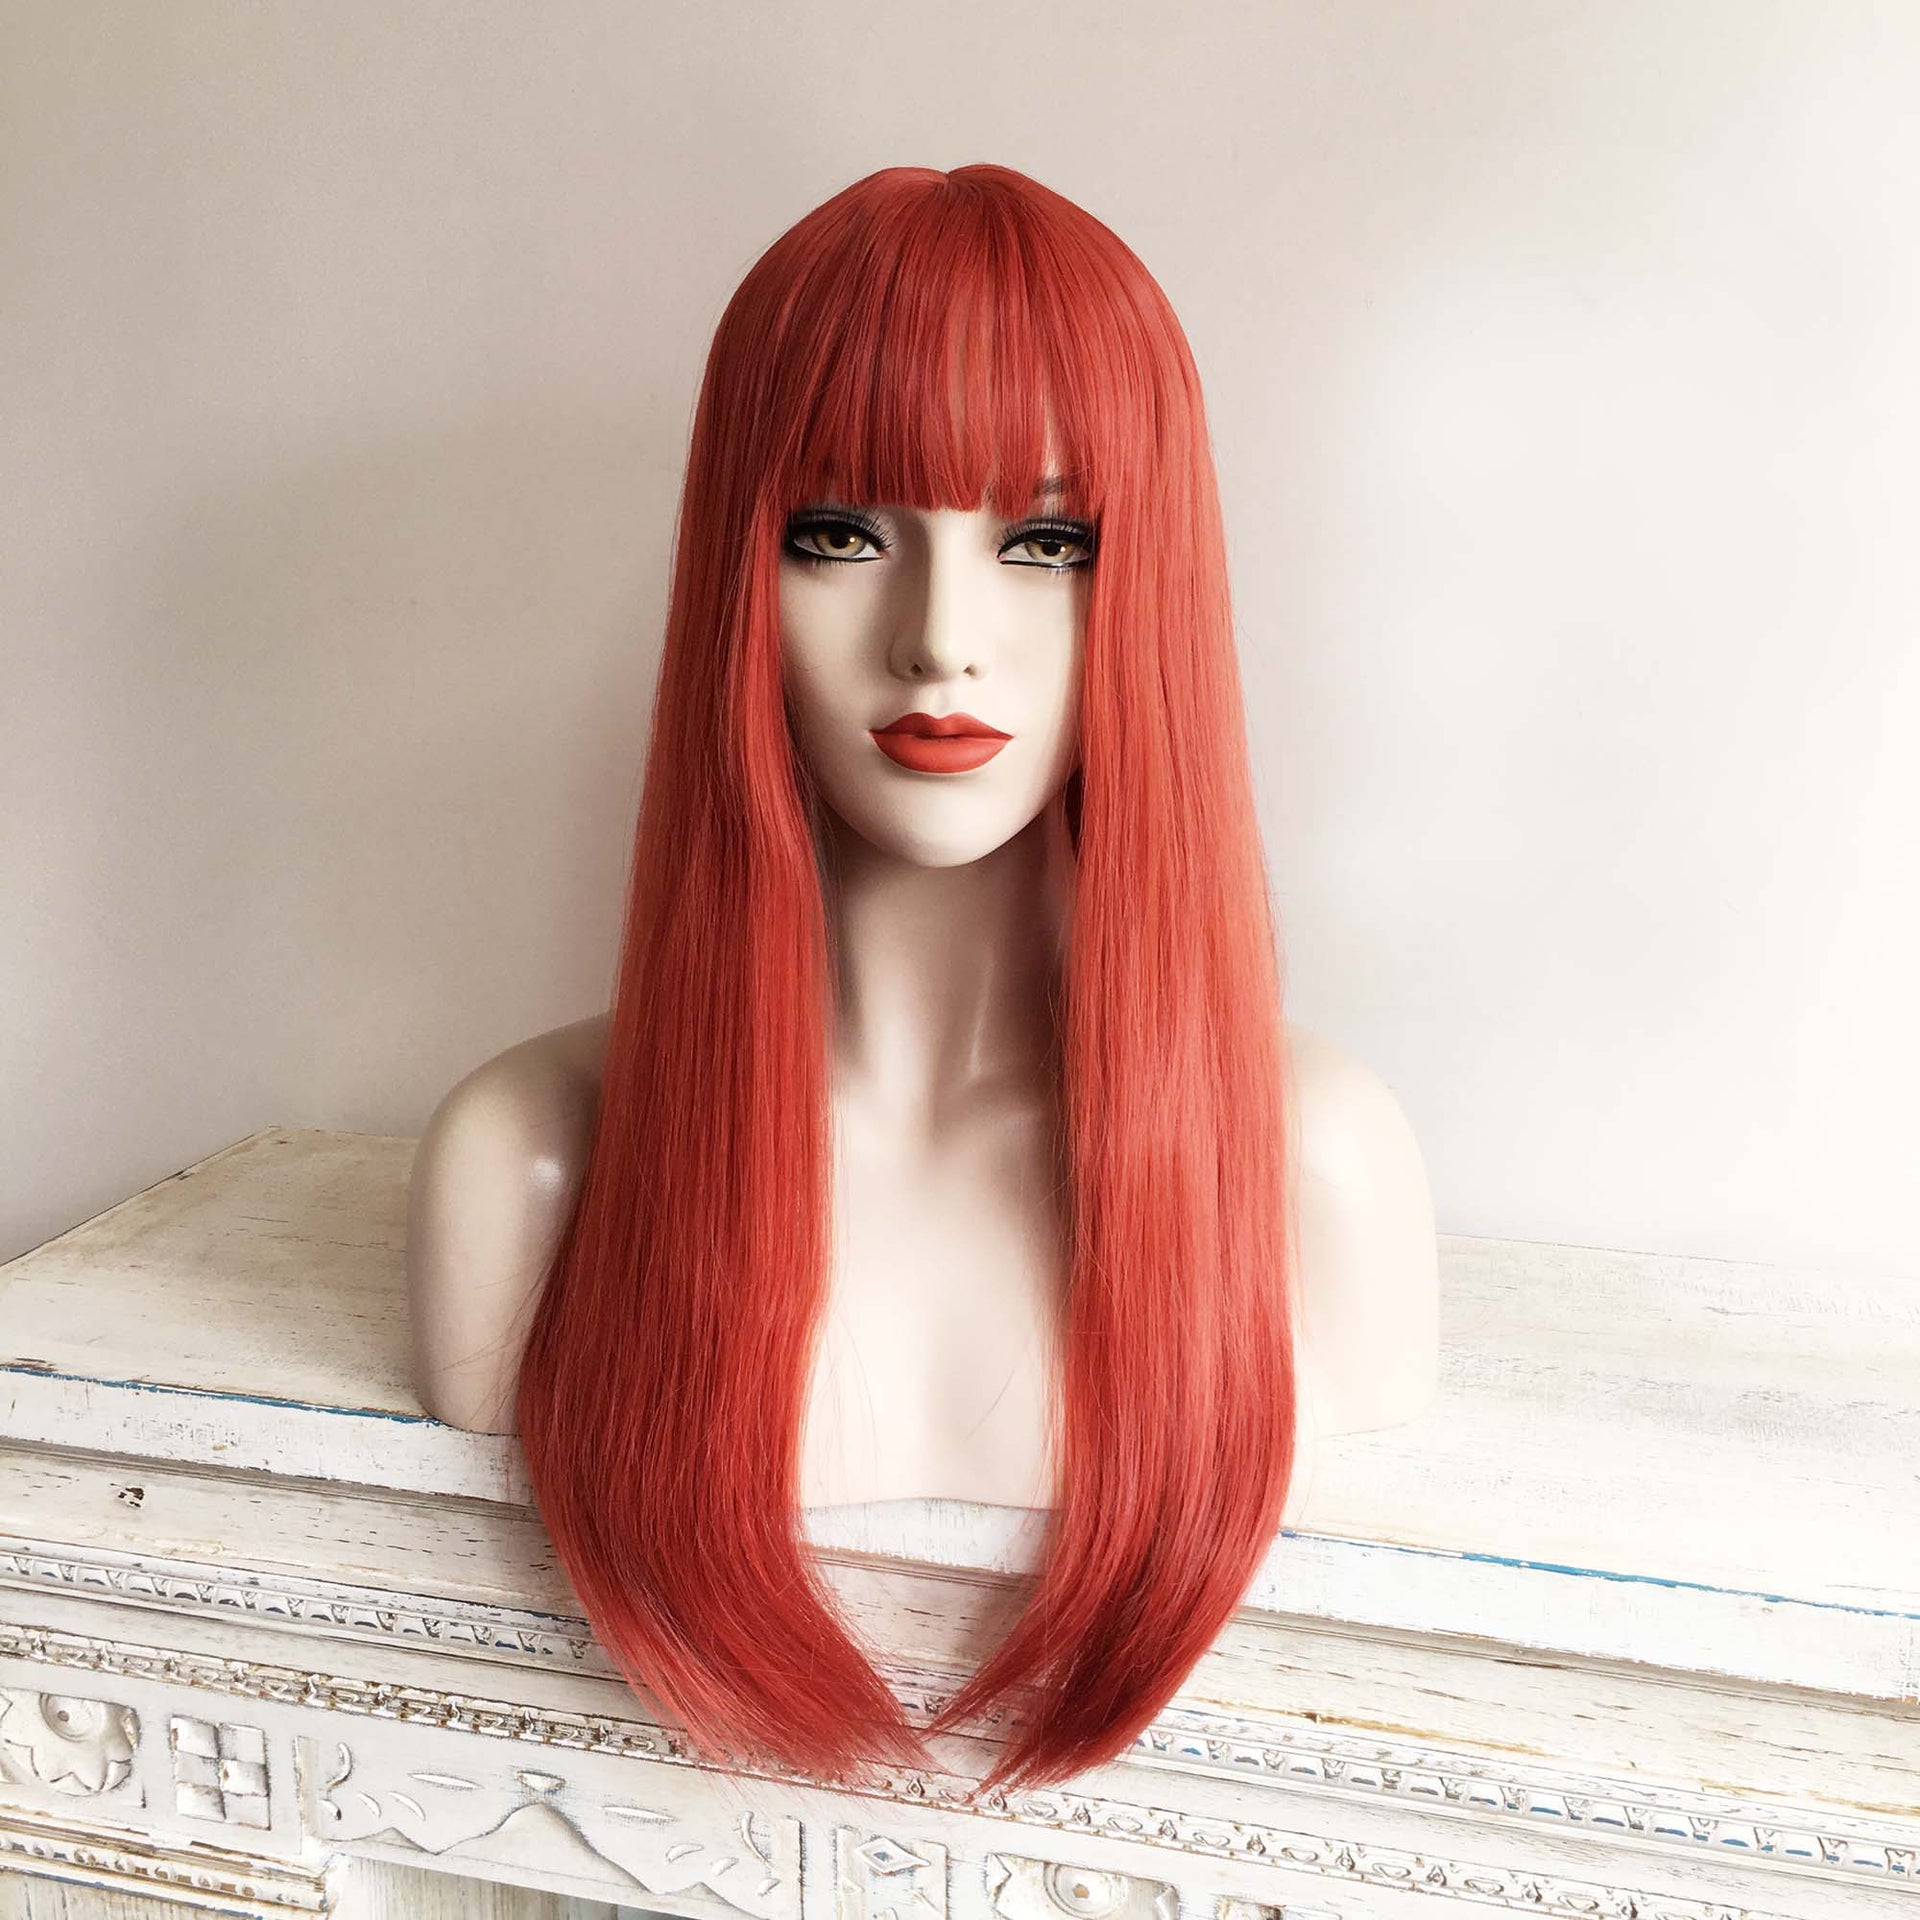 nevermindyrhead Blonde Ombre Long Straight Wig With Fringe Bangs Top Skin 4 Colours For Women 24 Inches Red